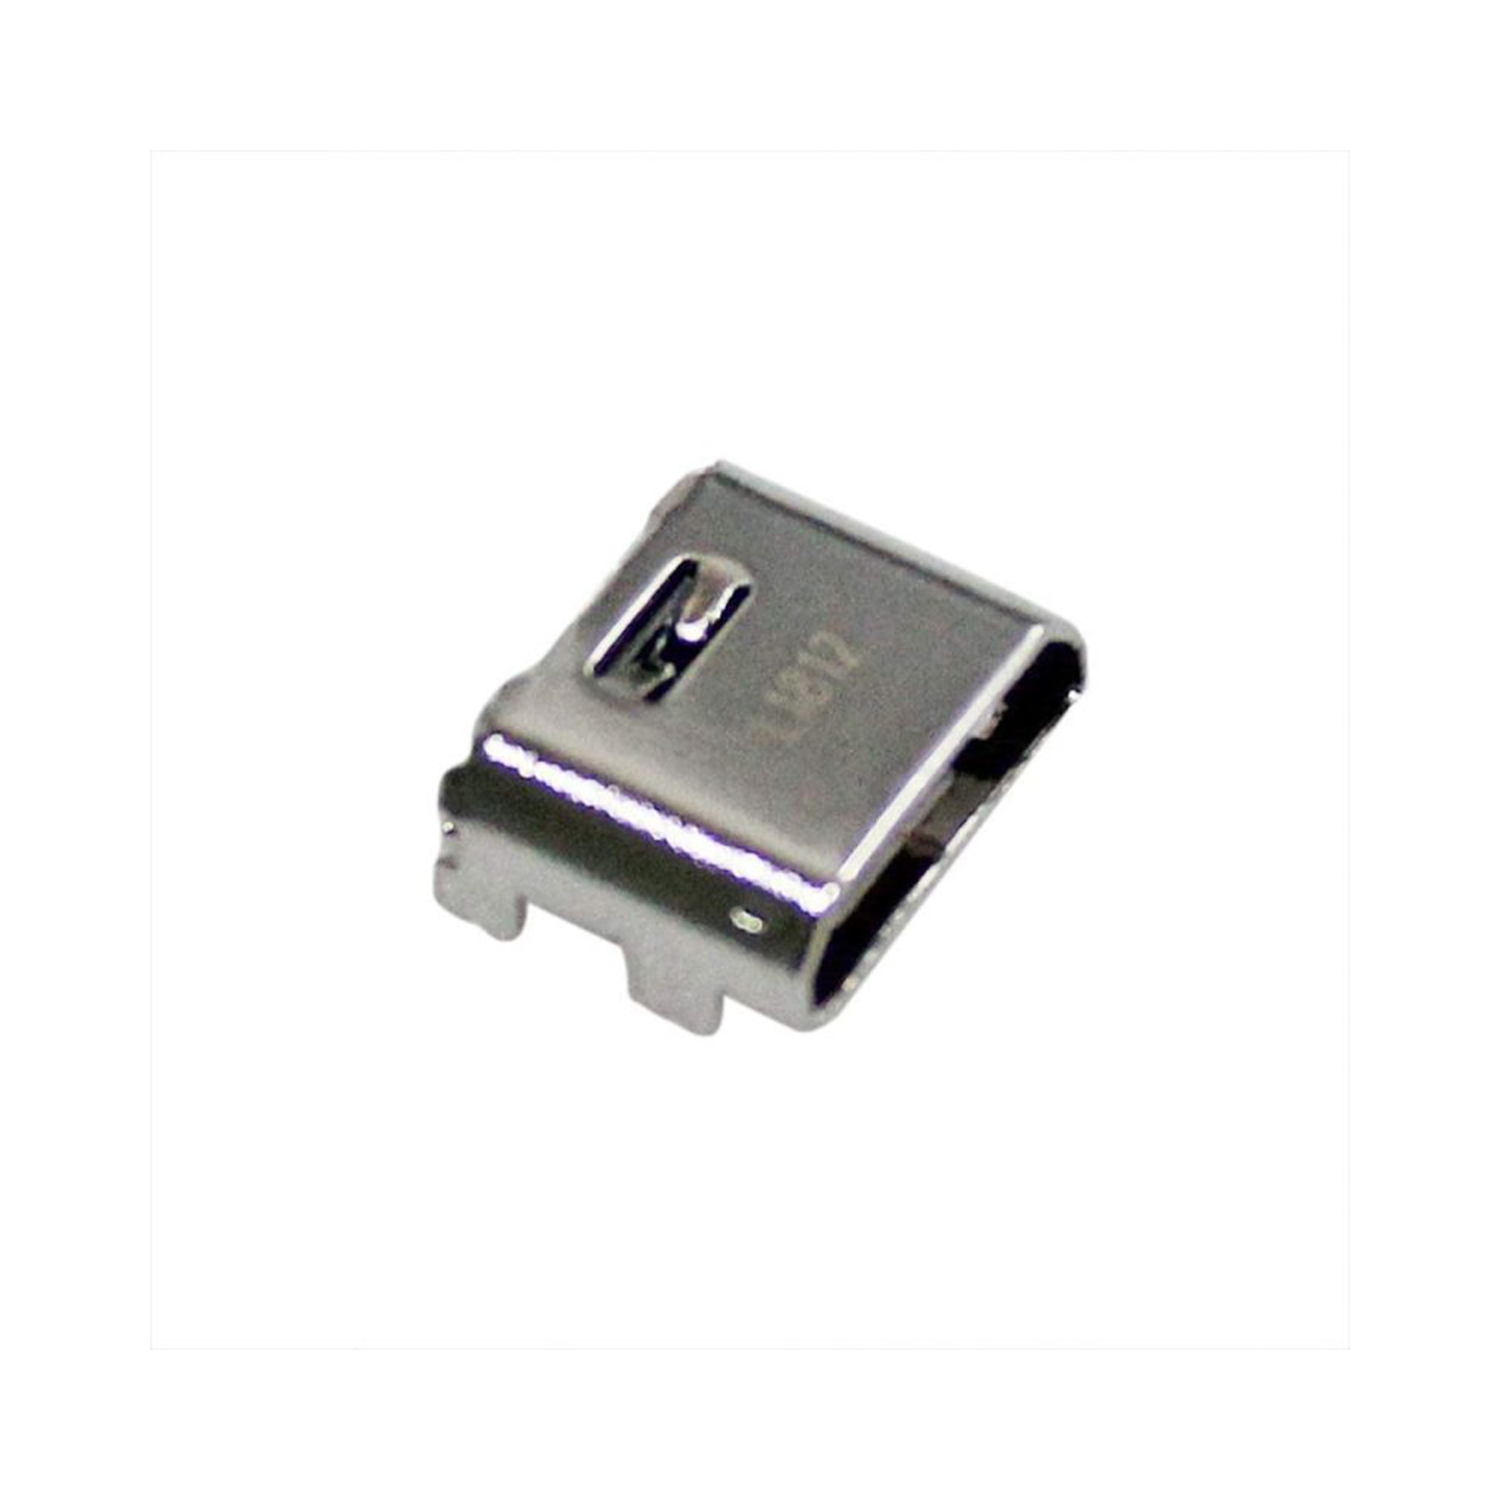 Replacement Charge Port For Samsung Galaxy Core Prime/Tab E 9.6 /Tab E 8.0/Grand/Grand Neo/Tab A/Tab 3 Lite 7.0/8.0